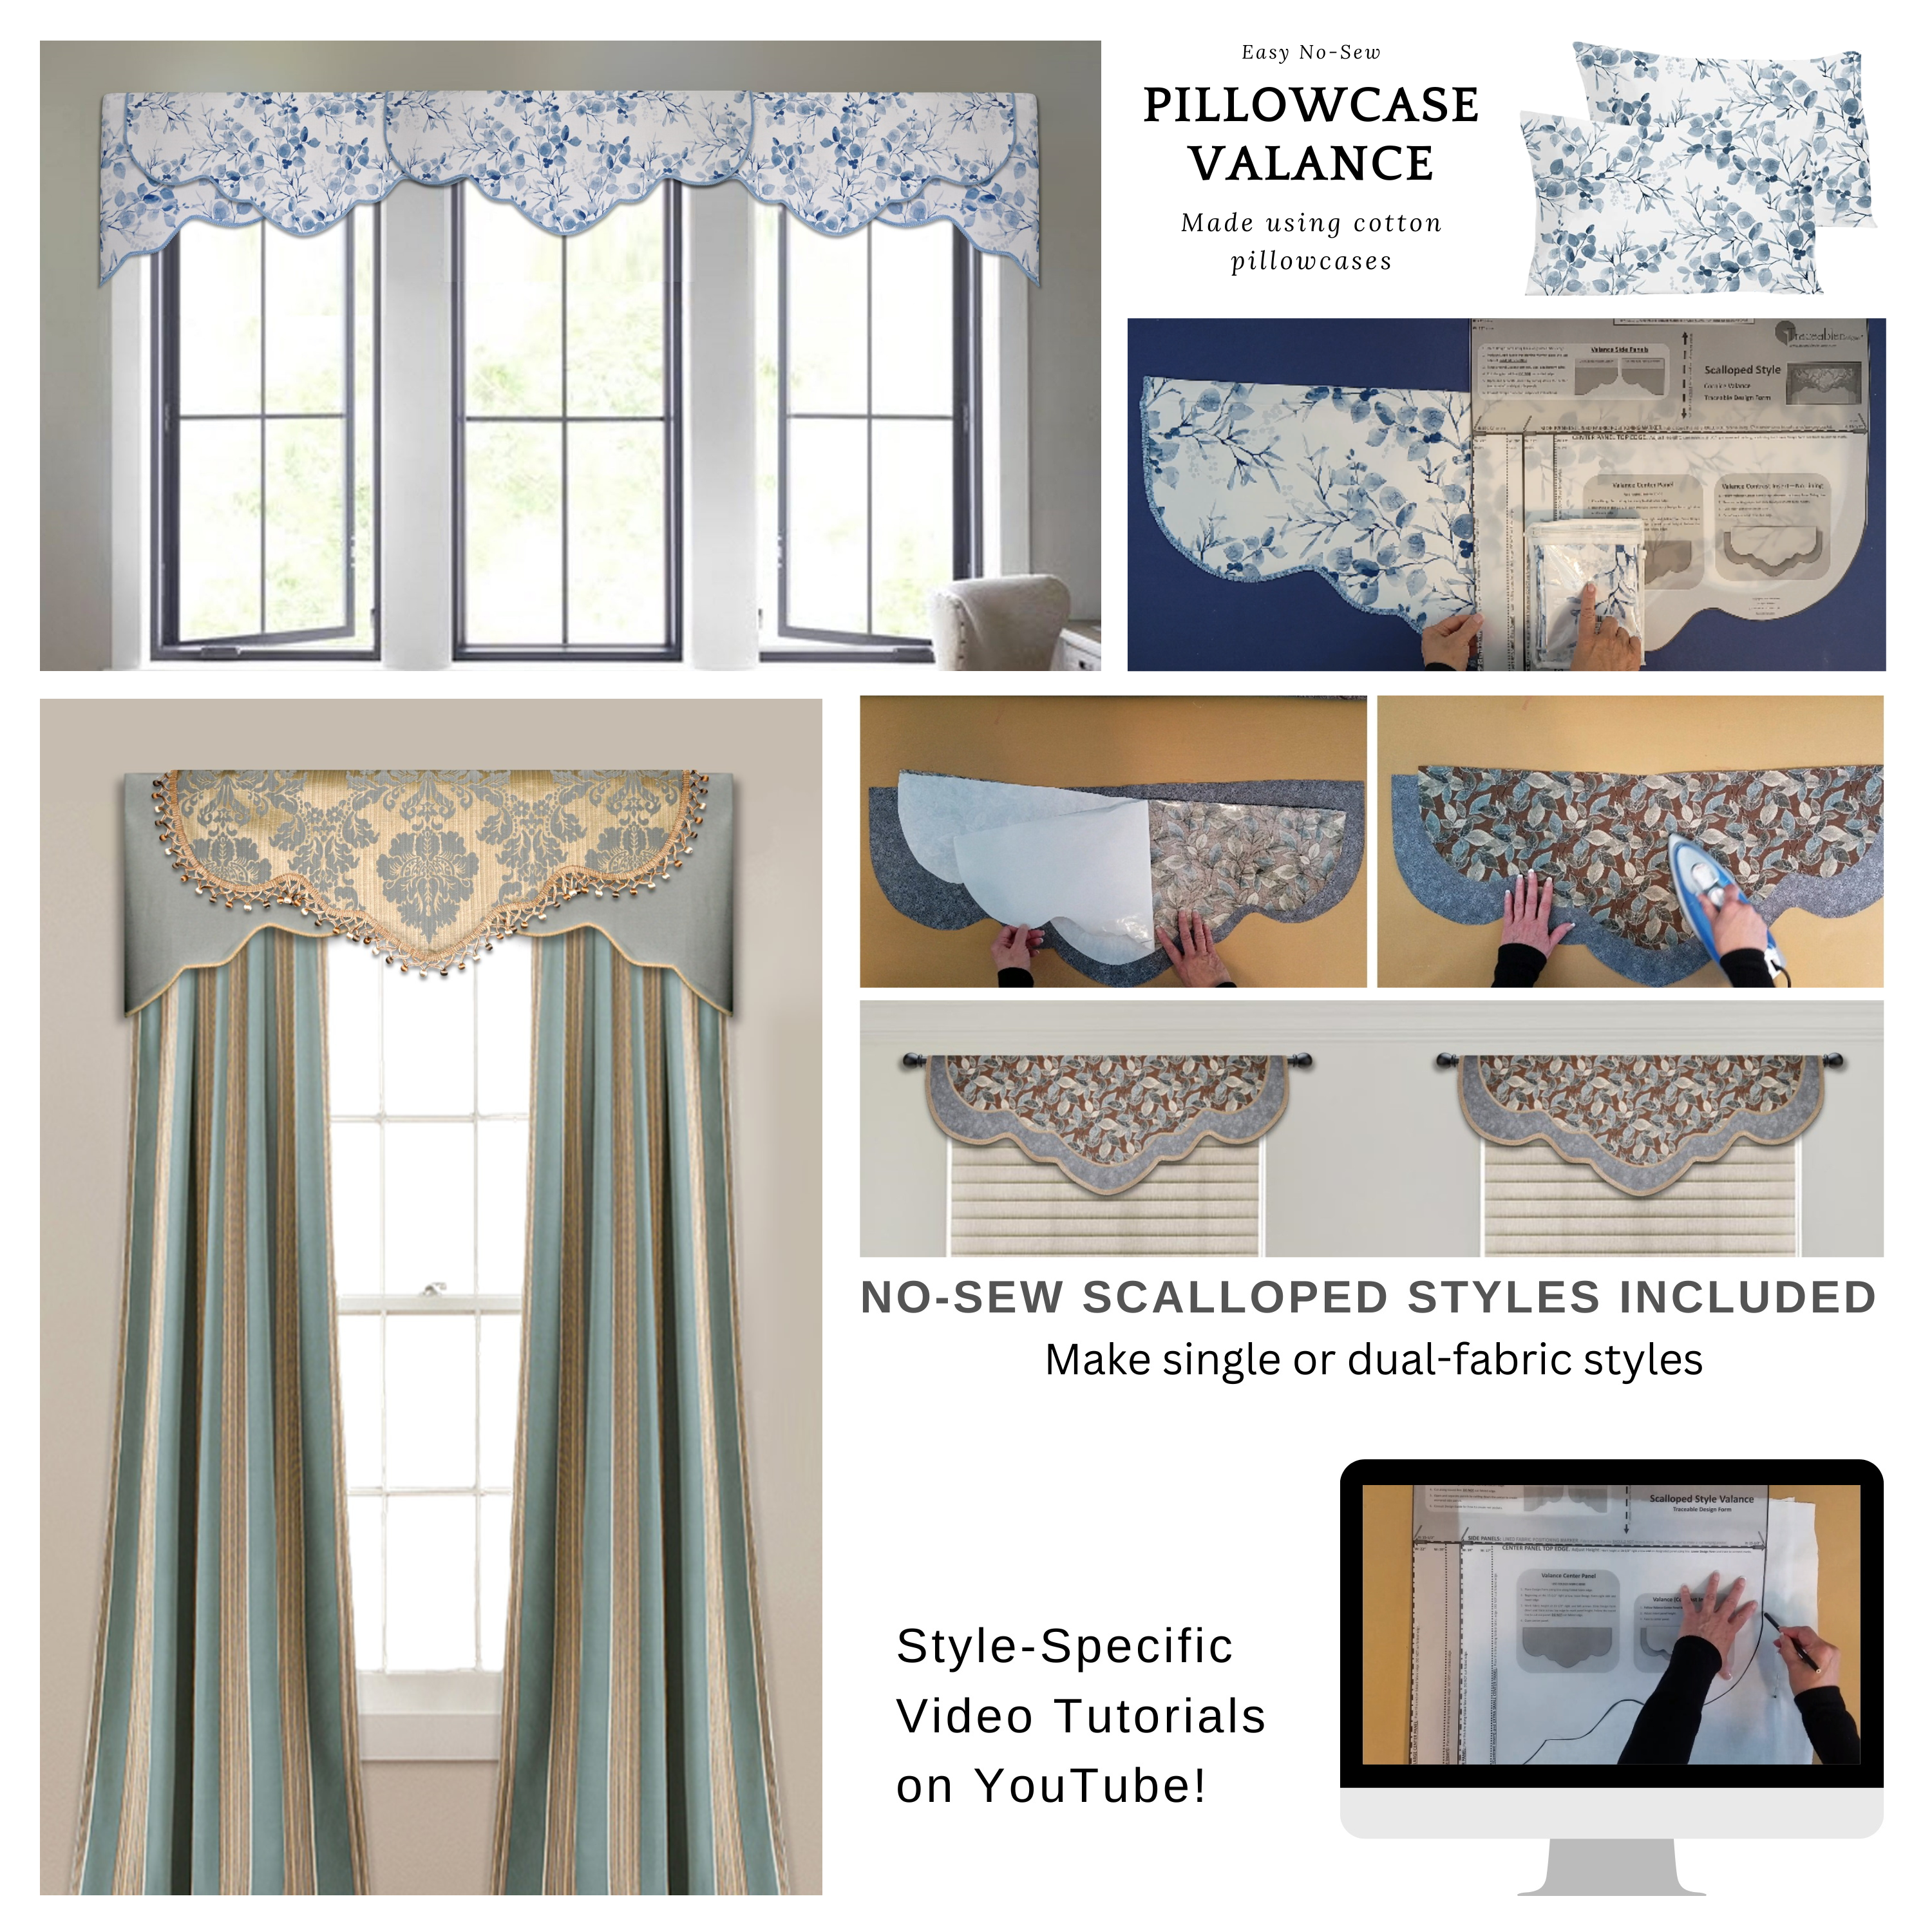 Traceable Designer no-sew valance kit includes scalloped, arched and straight cornice valance styles. Make professional-looking valances without sewing! Designed by Linda Schurr